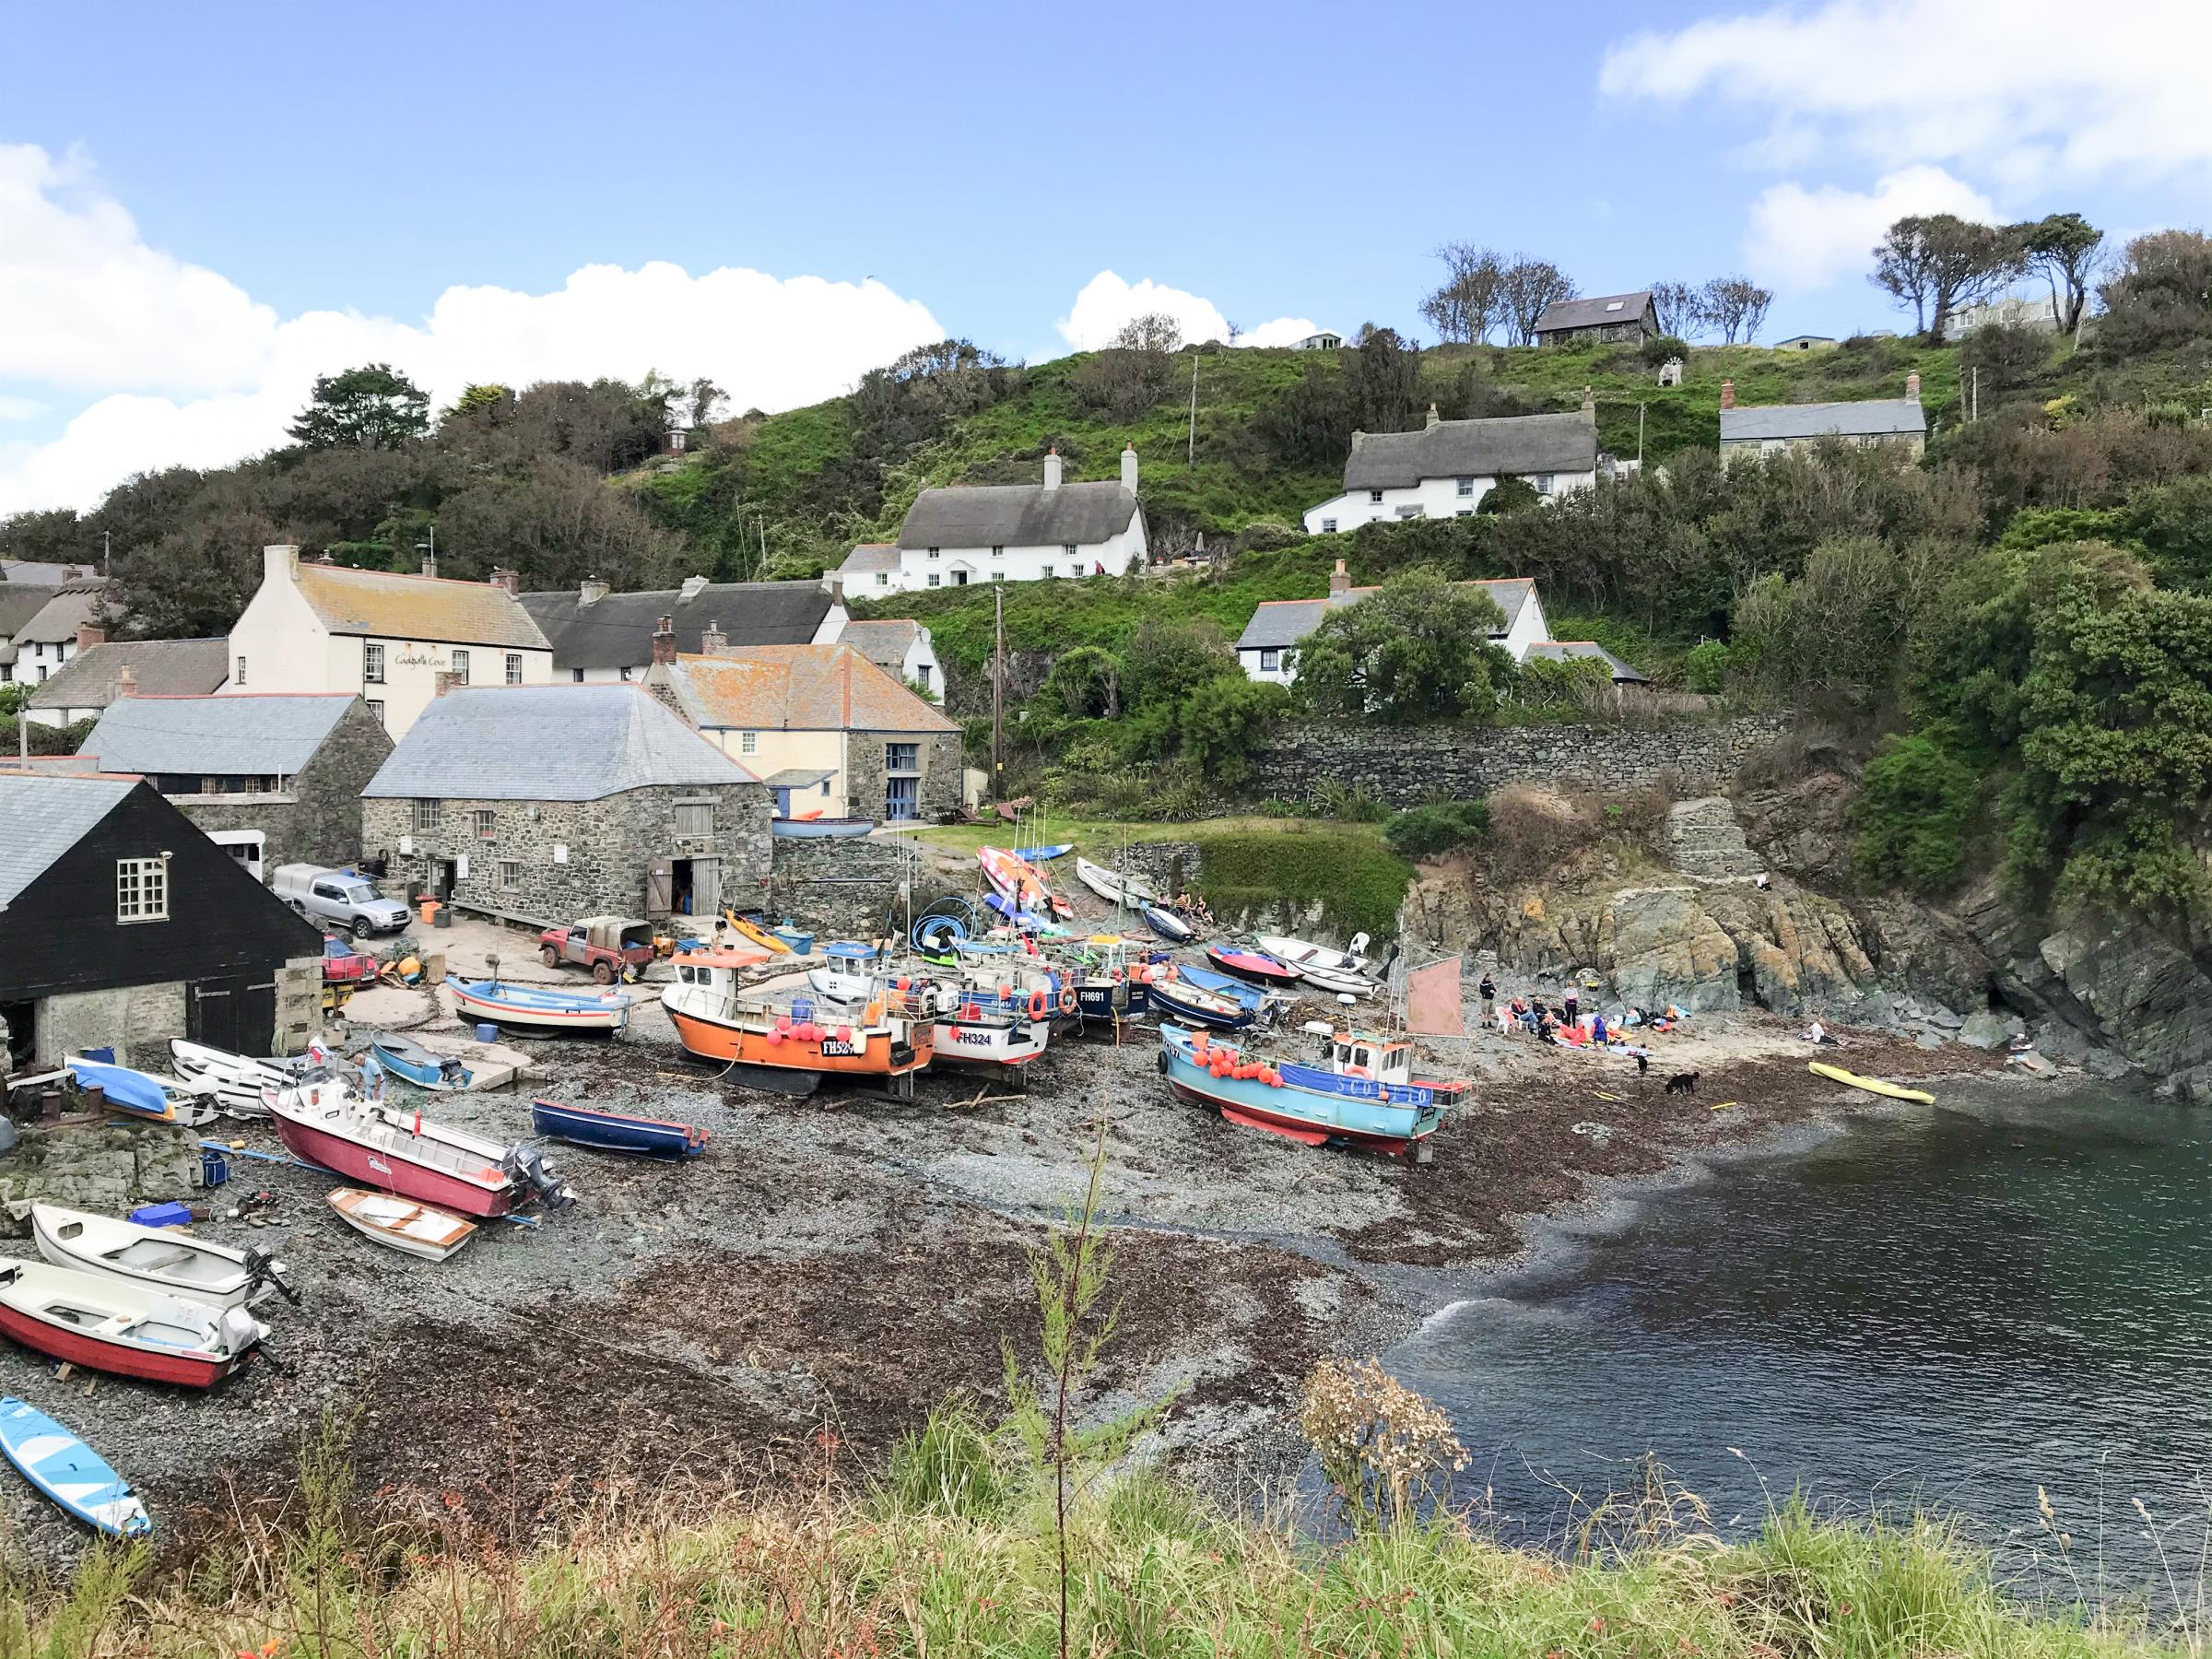 Cadgwith. Photograph: Jane Cabrera